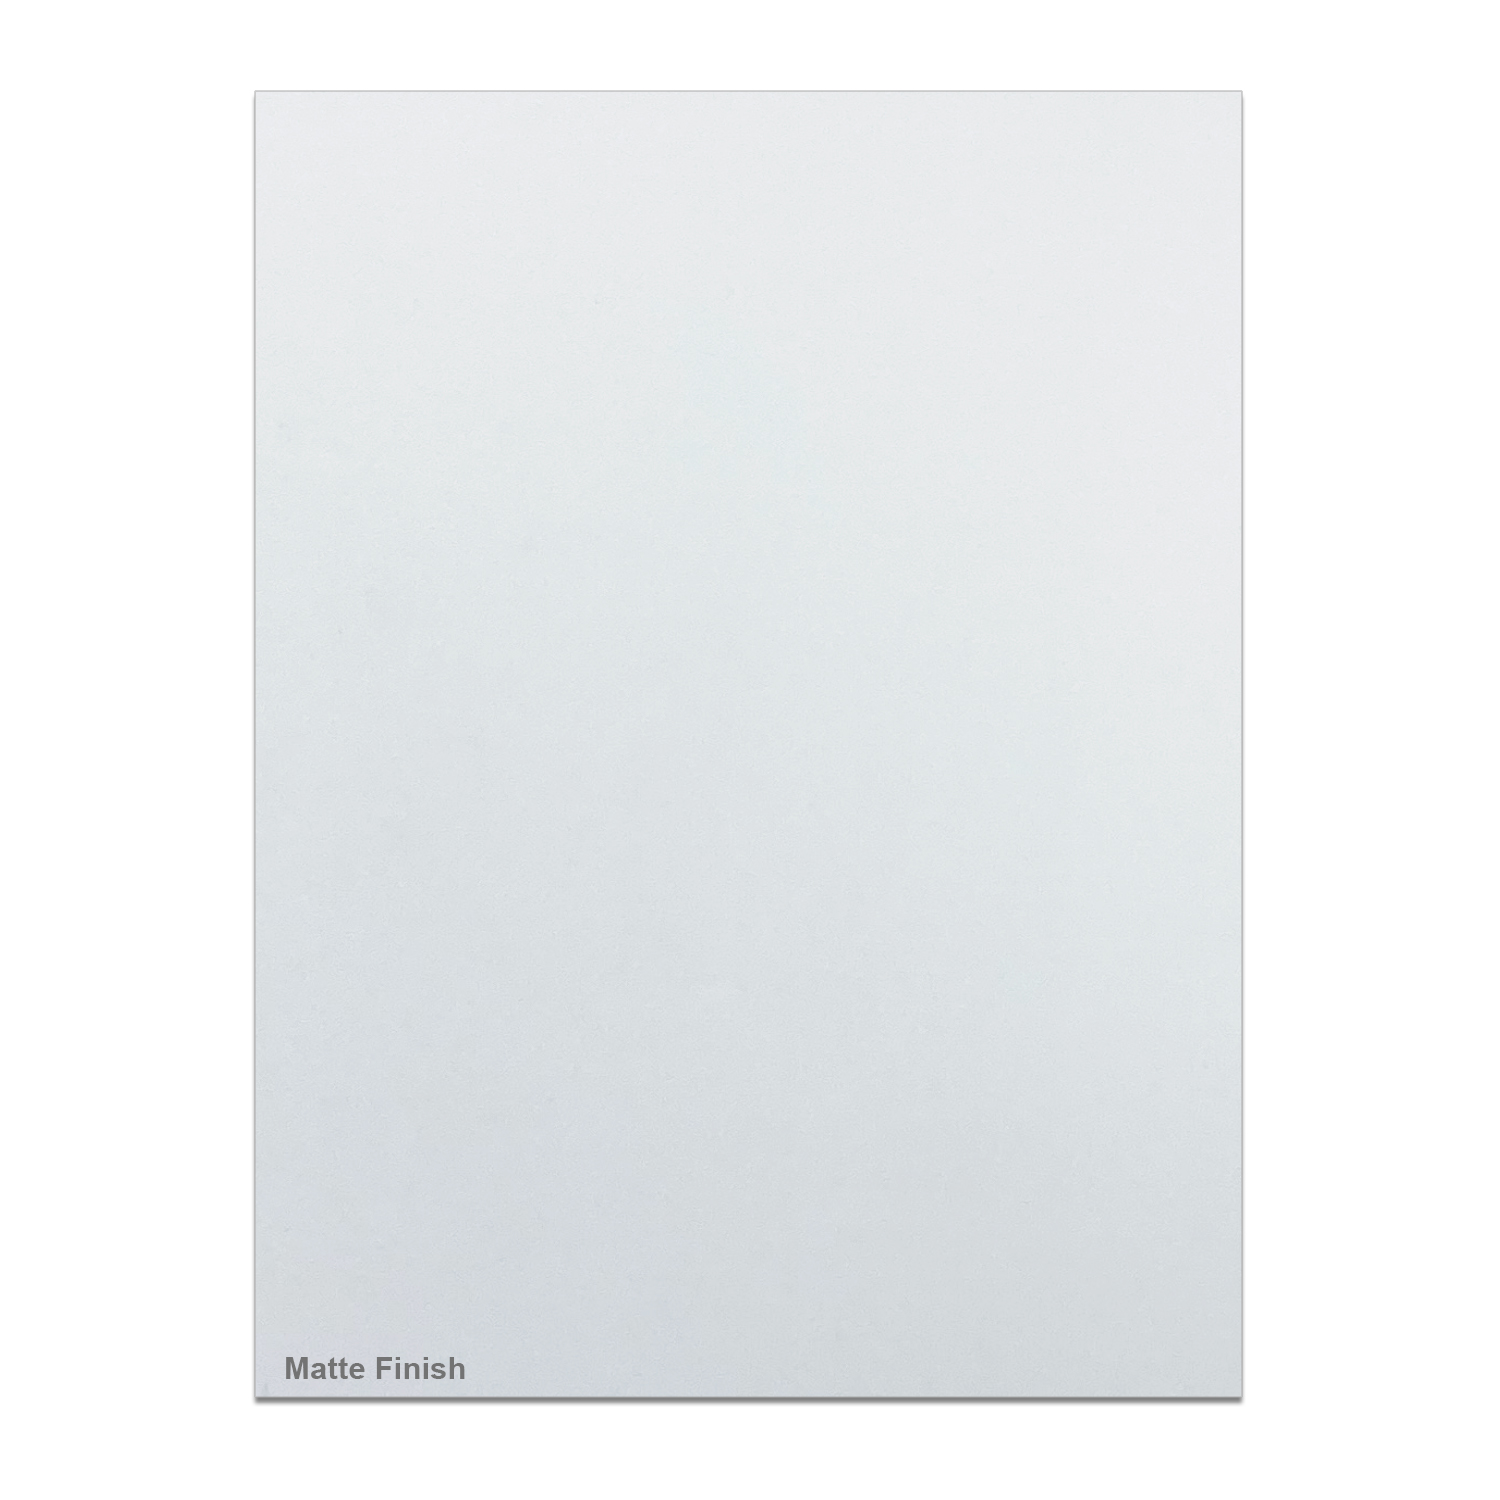 Superior Graphic Supplies Clear Matte/Matte Rigid Vinyl Sheet - .010 inches  (10mil) Thickness x 28 inches Wide x 40 inches Long for DIY, Display,  Projects, Prints and Crafts, Pack of 2 